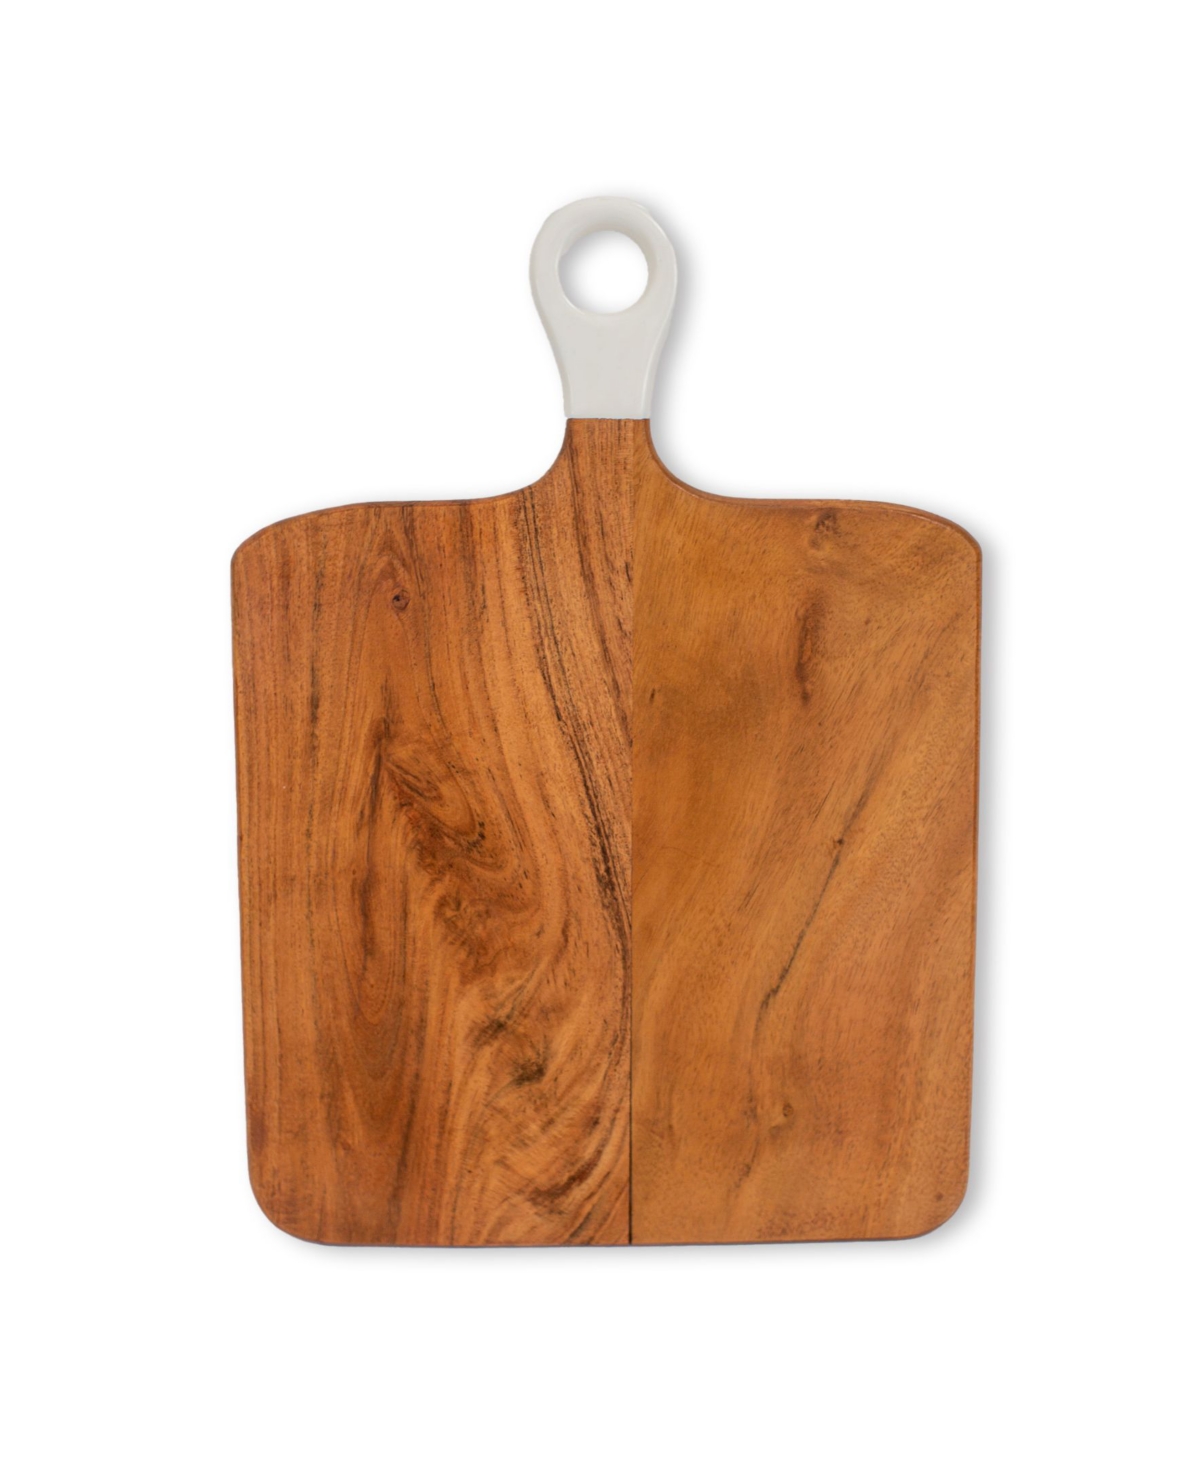 Jeanne Fitz Wood Plus Collection Acacia Wood Square Charcuterie Board, Medium In Brown And White